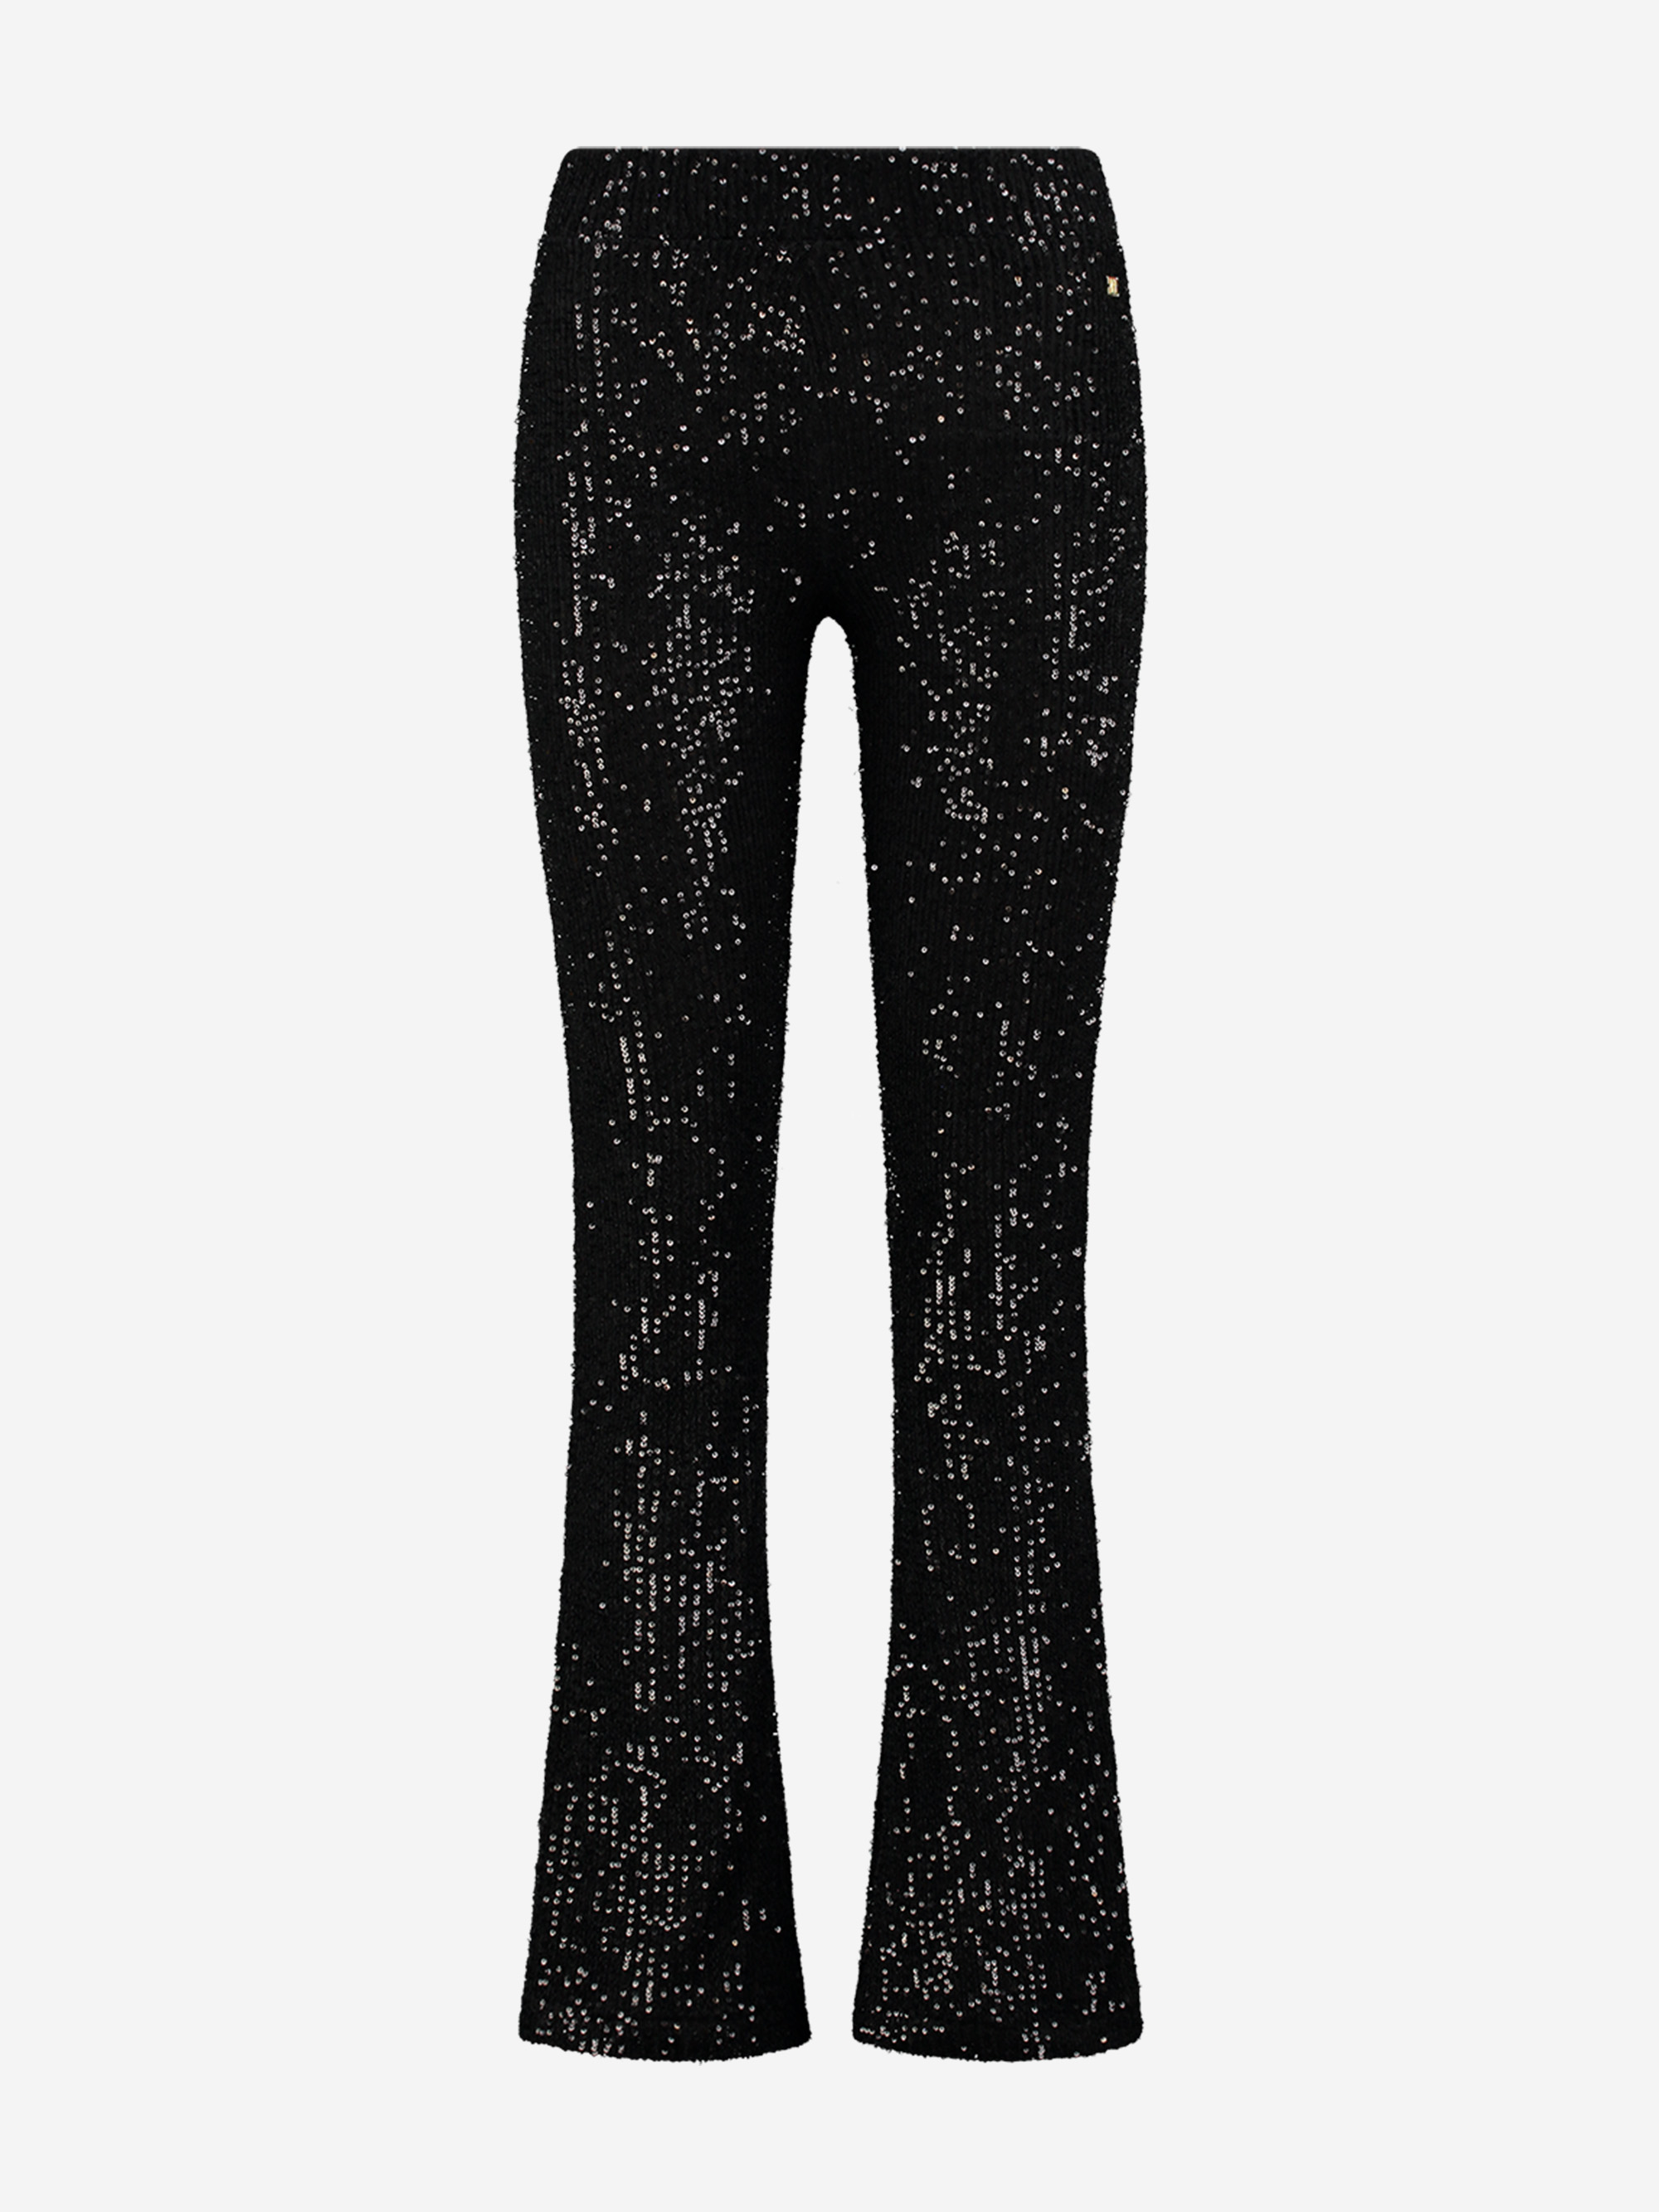 Sequin flare pants with high rise